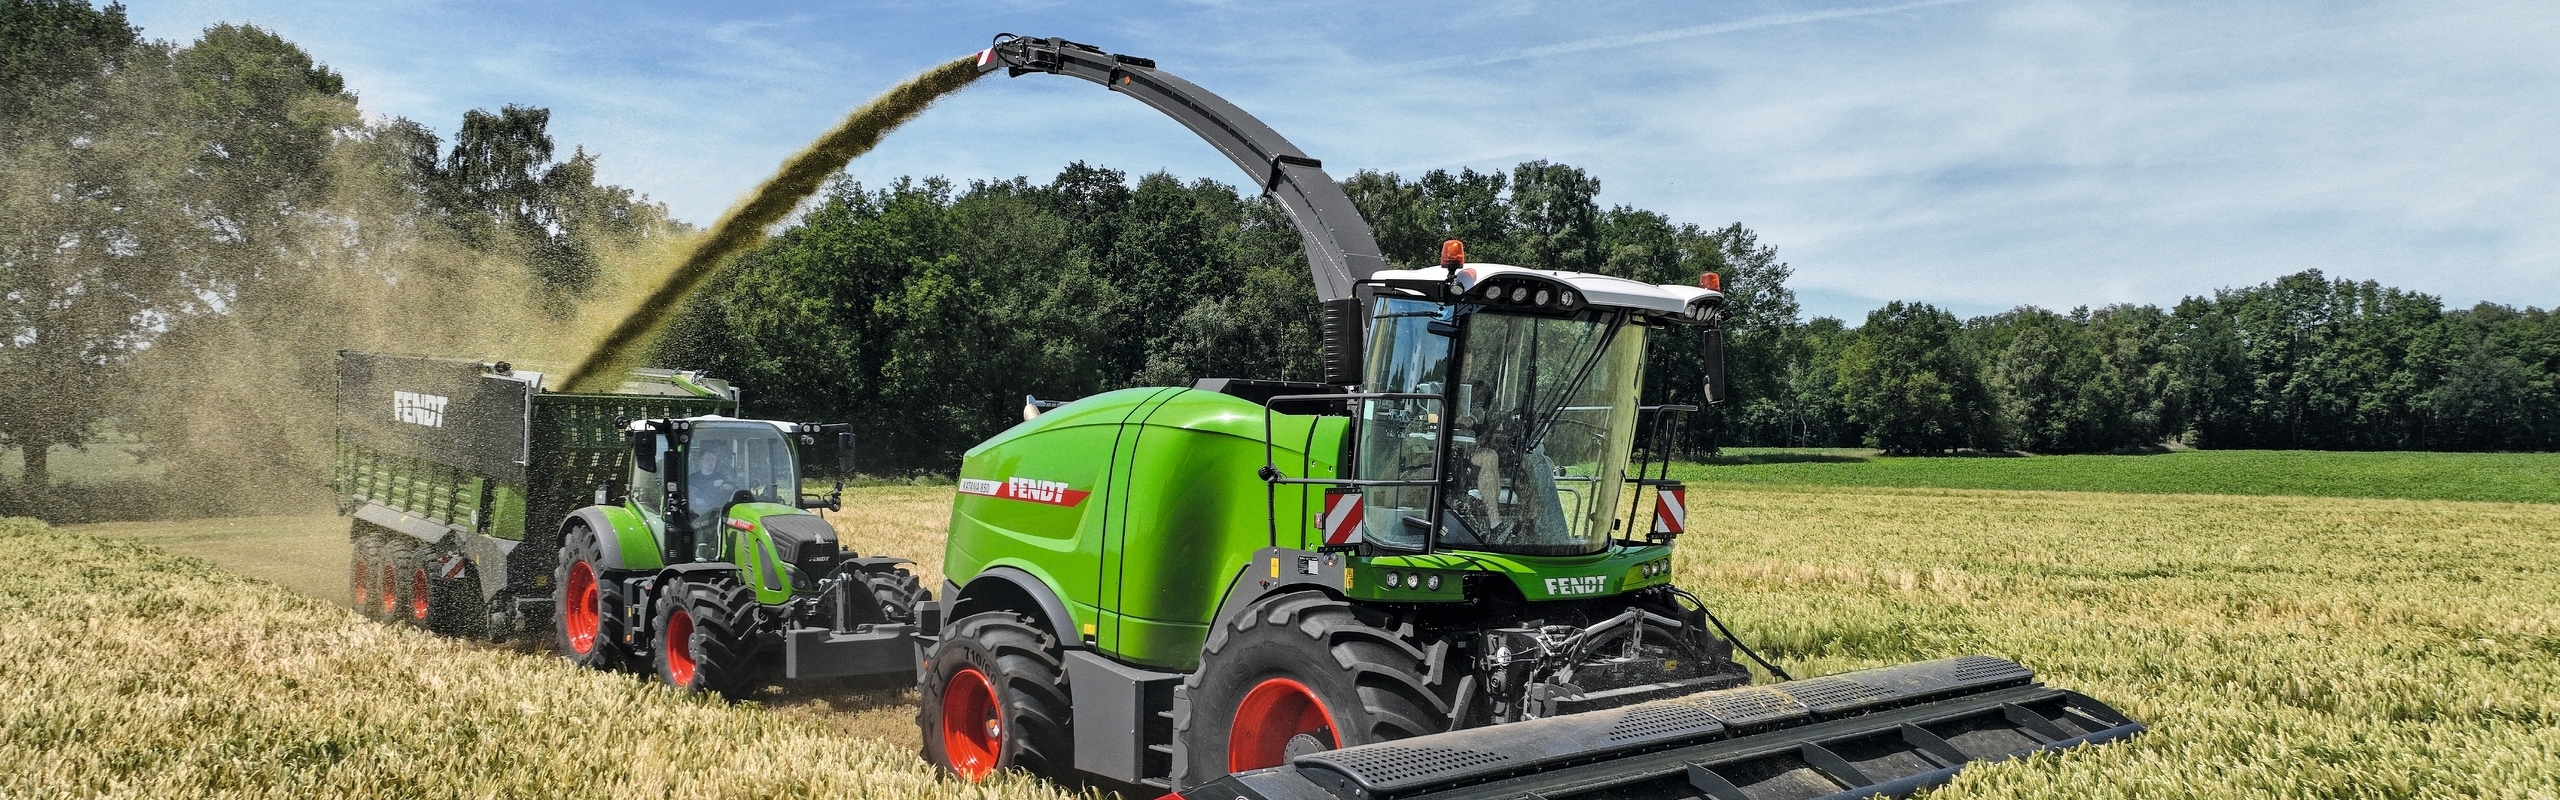 Fendt Katana 850 chops grain and transports it to the forage wagon